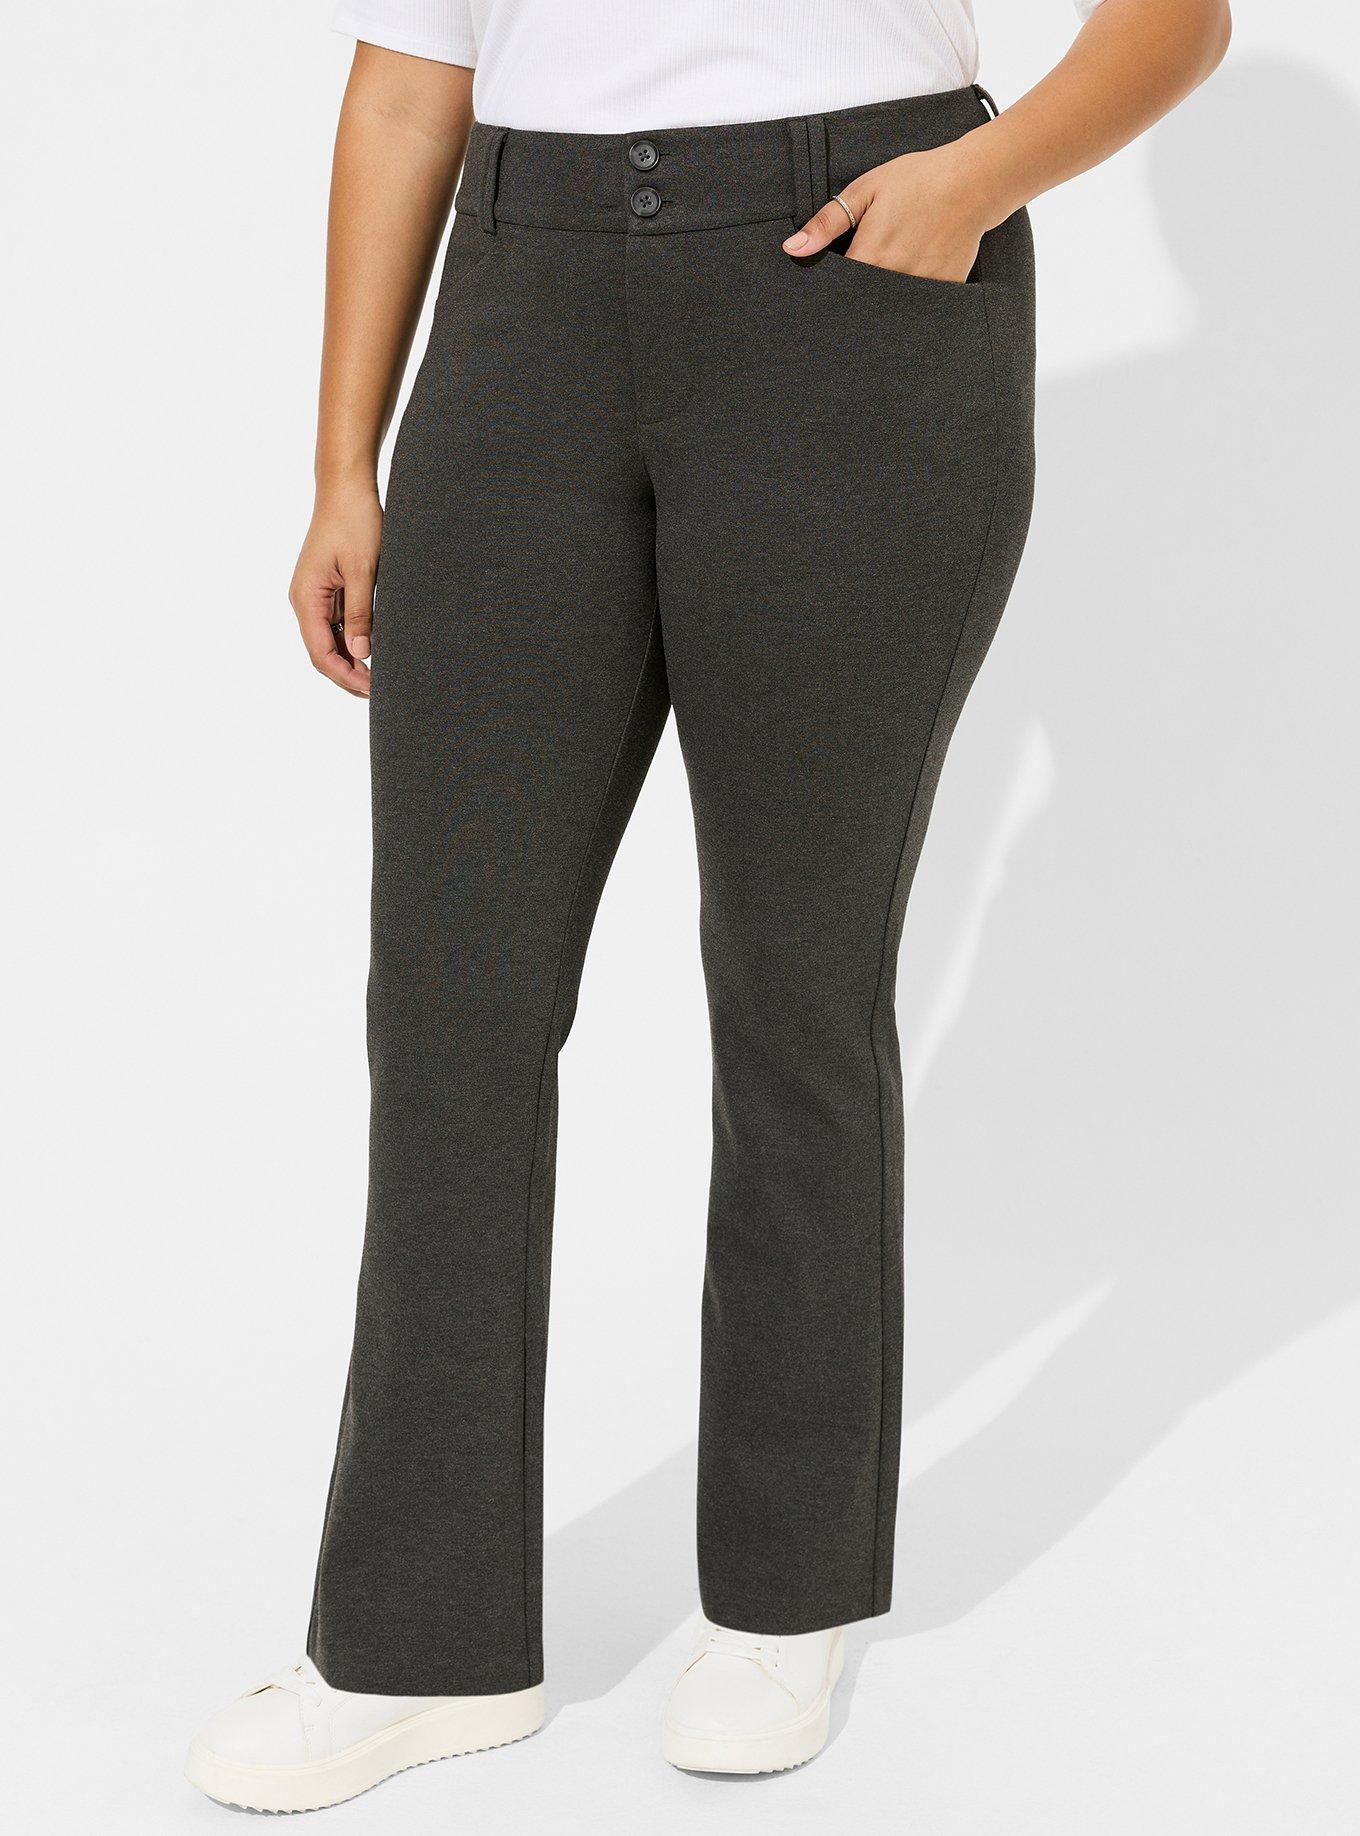 Slim Trouser Pants In Plus Size In Ponte Knit - Charcoal Heathered Grey